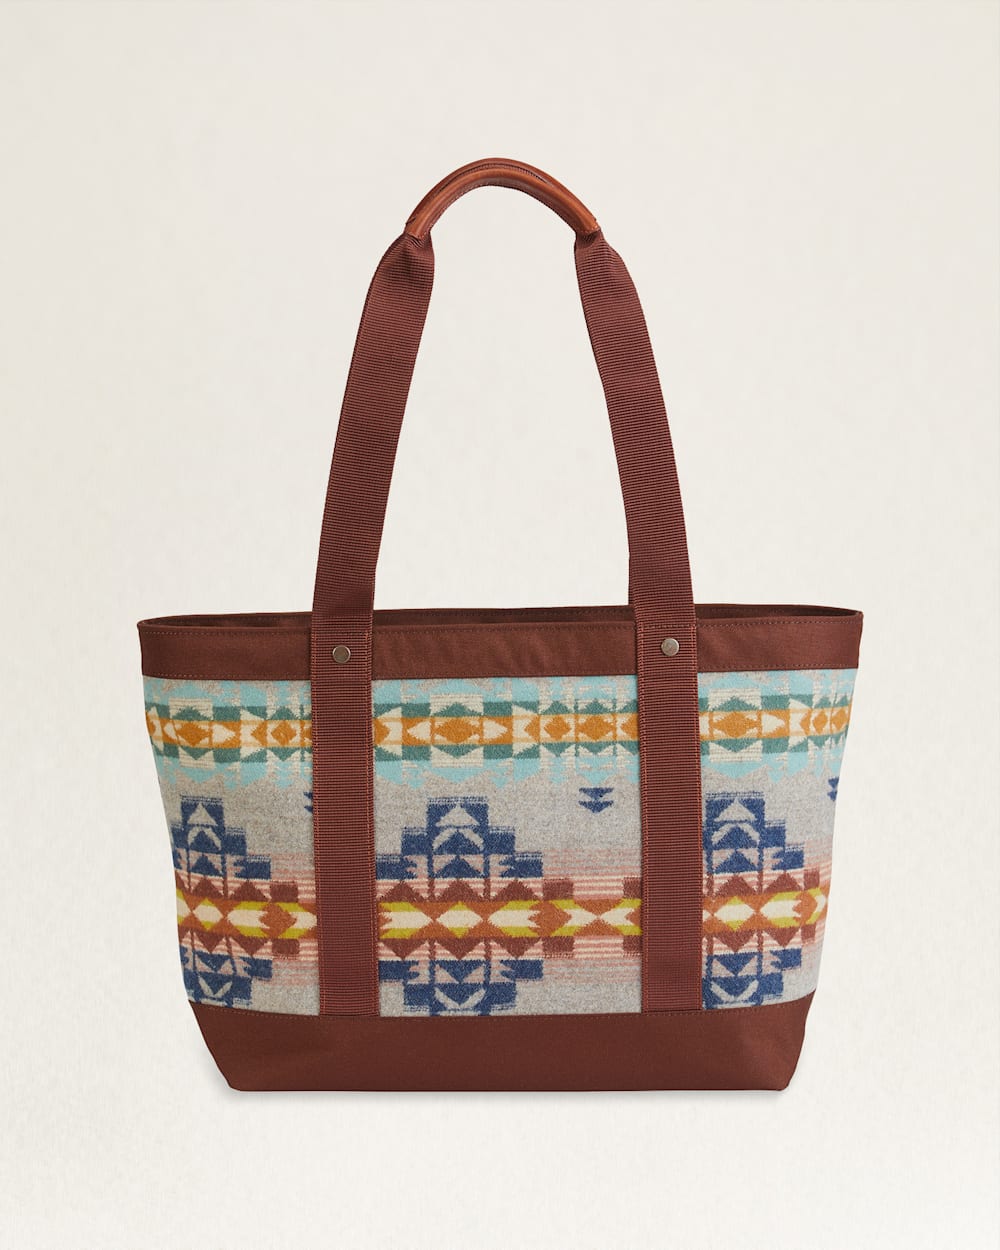 ALTERNATE VIEW OF DESERT DAWN WOOL/LEATHER ZIP TOTE IN TAN MIX image number 2